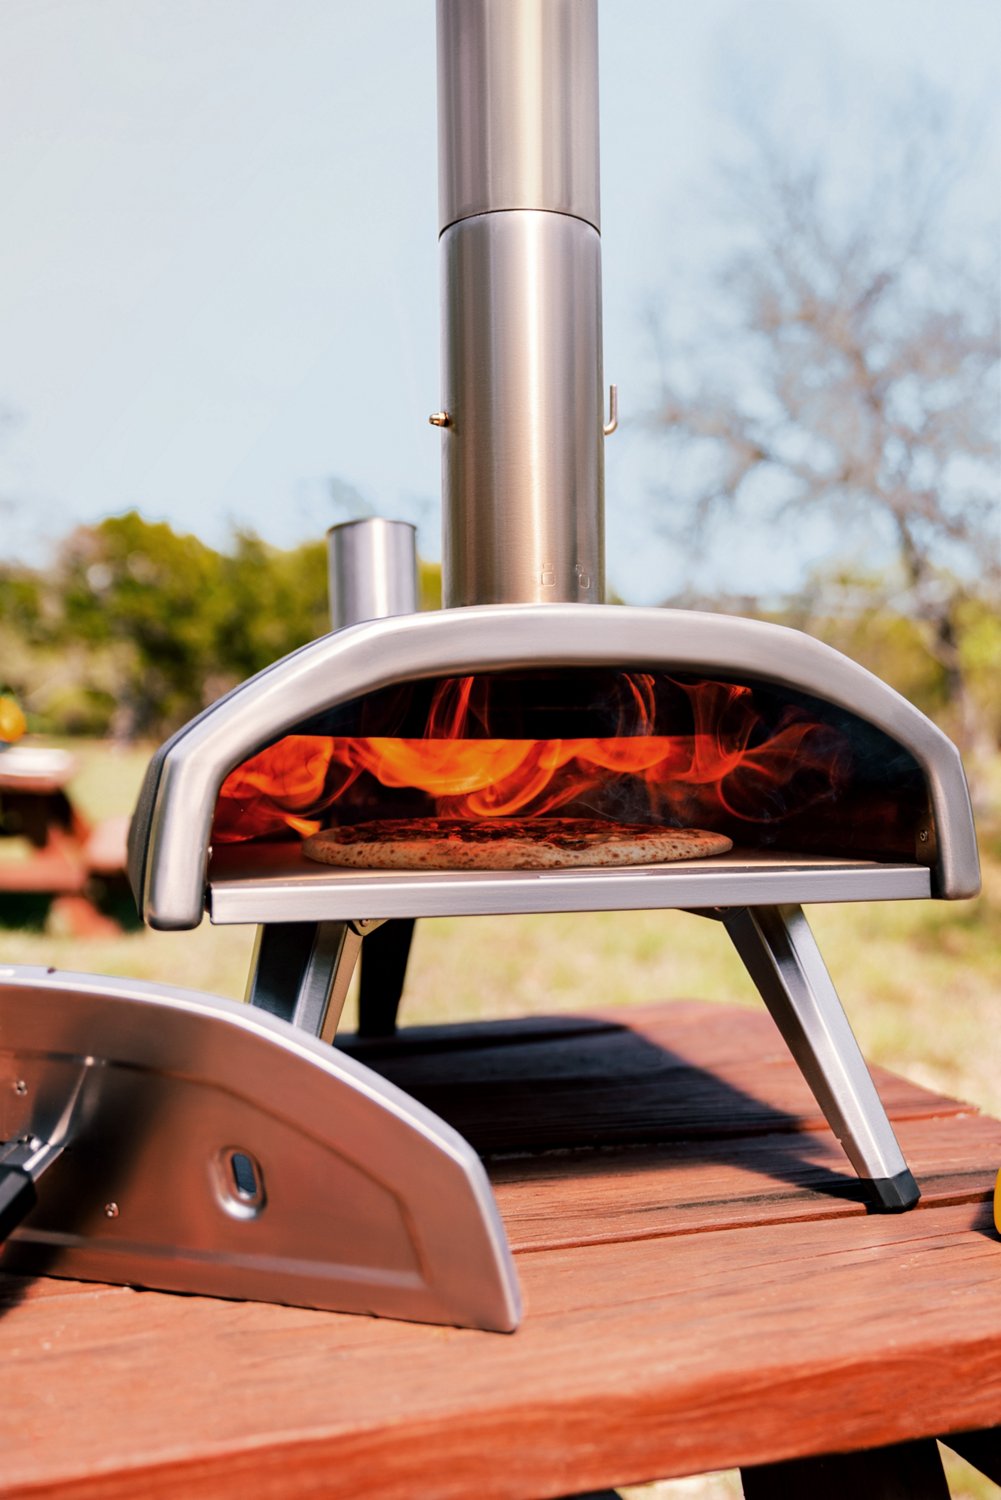 The ooni Fyra 12 Wood Fired Outdoor Pizza Oven is 22% off for Prime Day